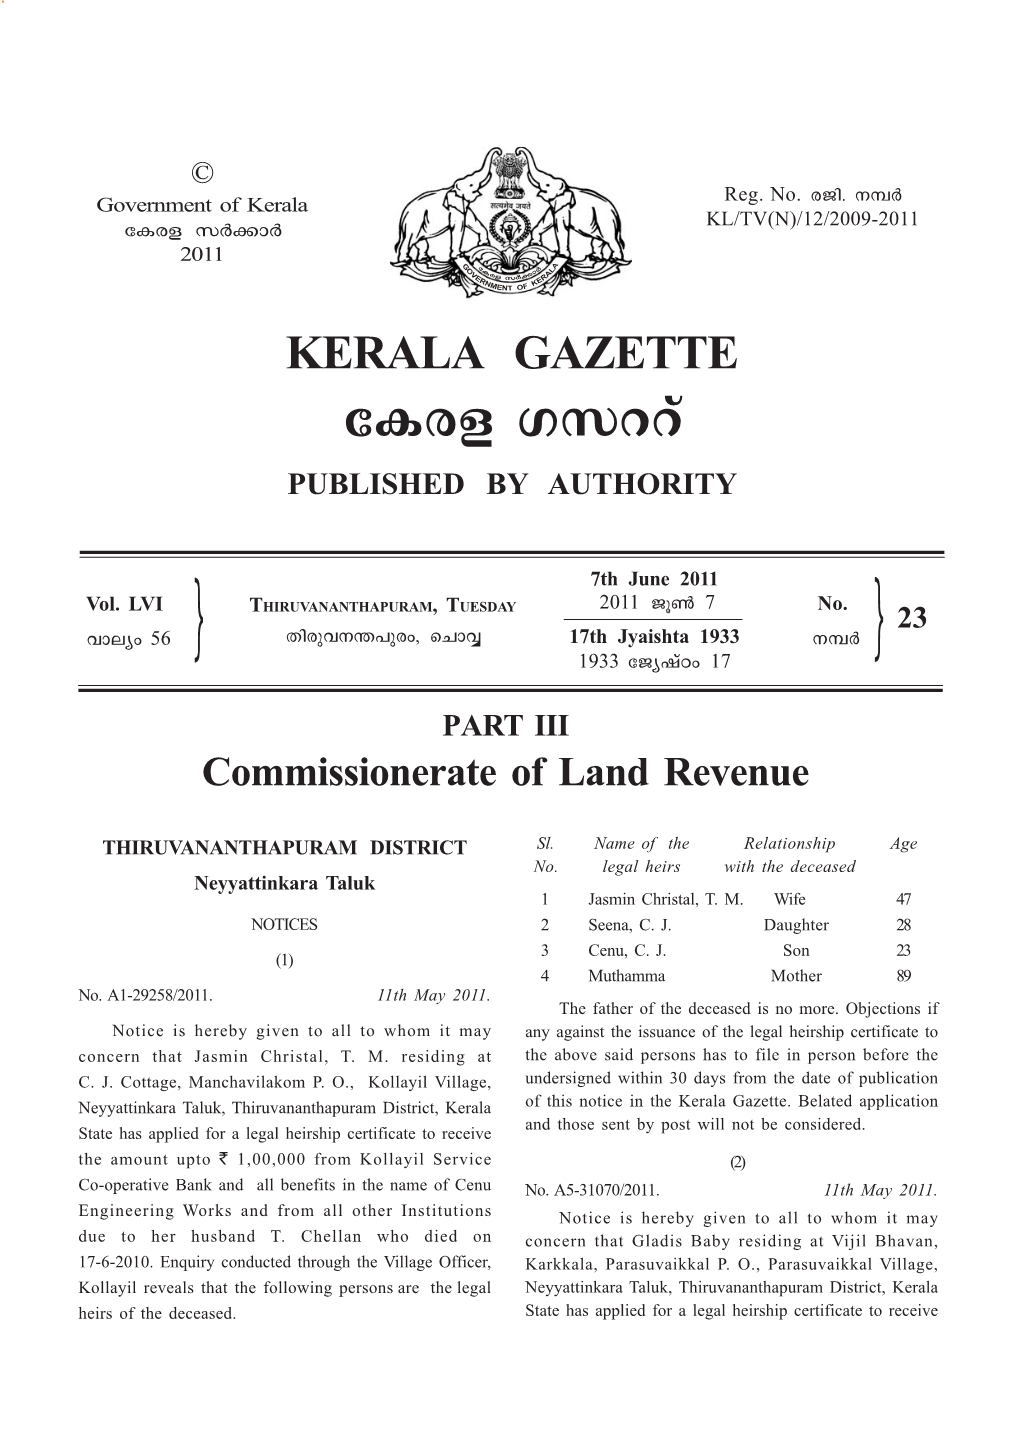 Ticf Kkddv PUBLISHED by AUTHORITY